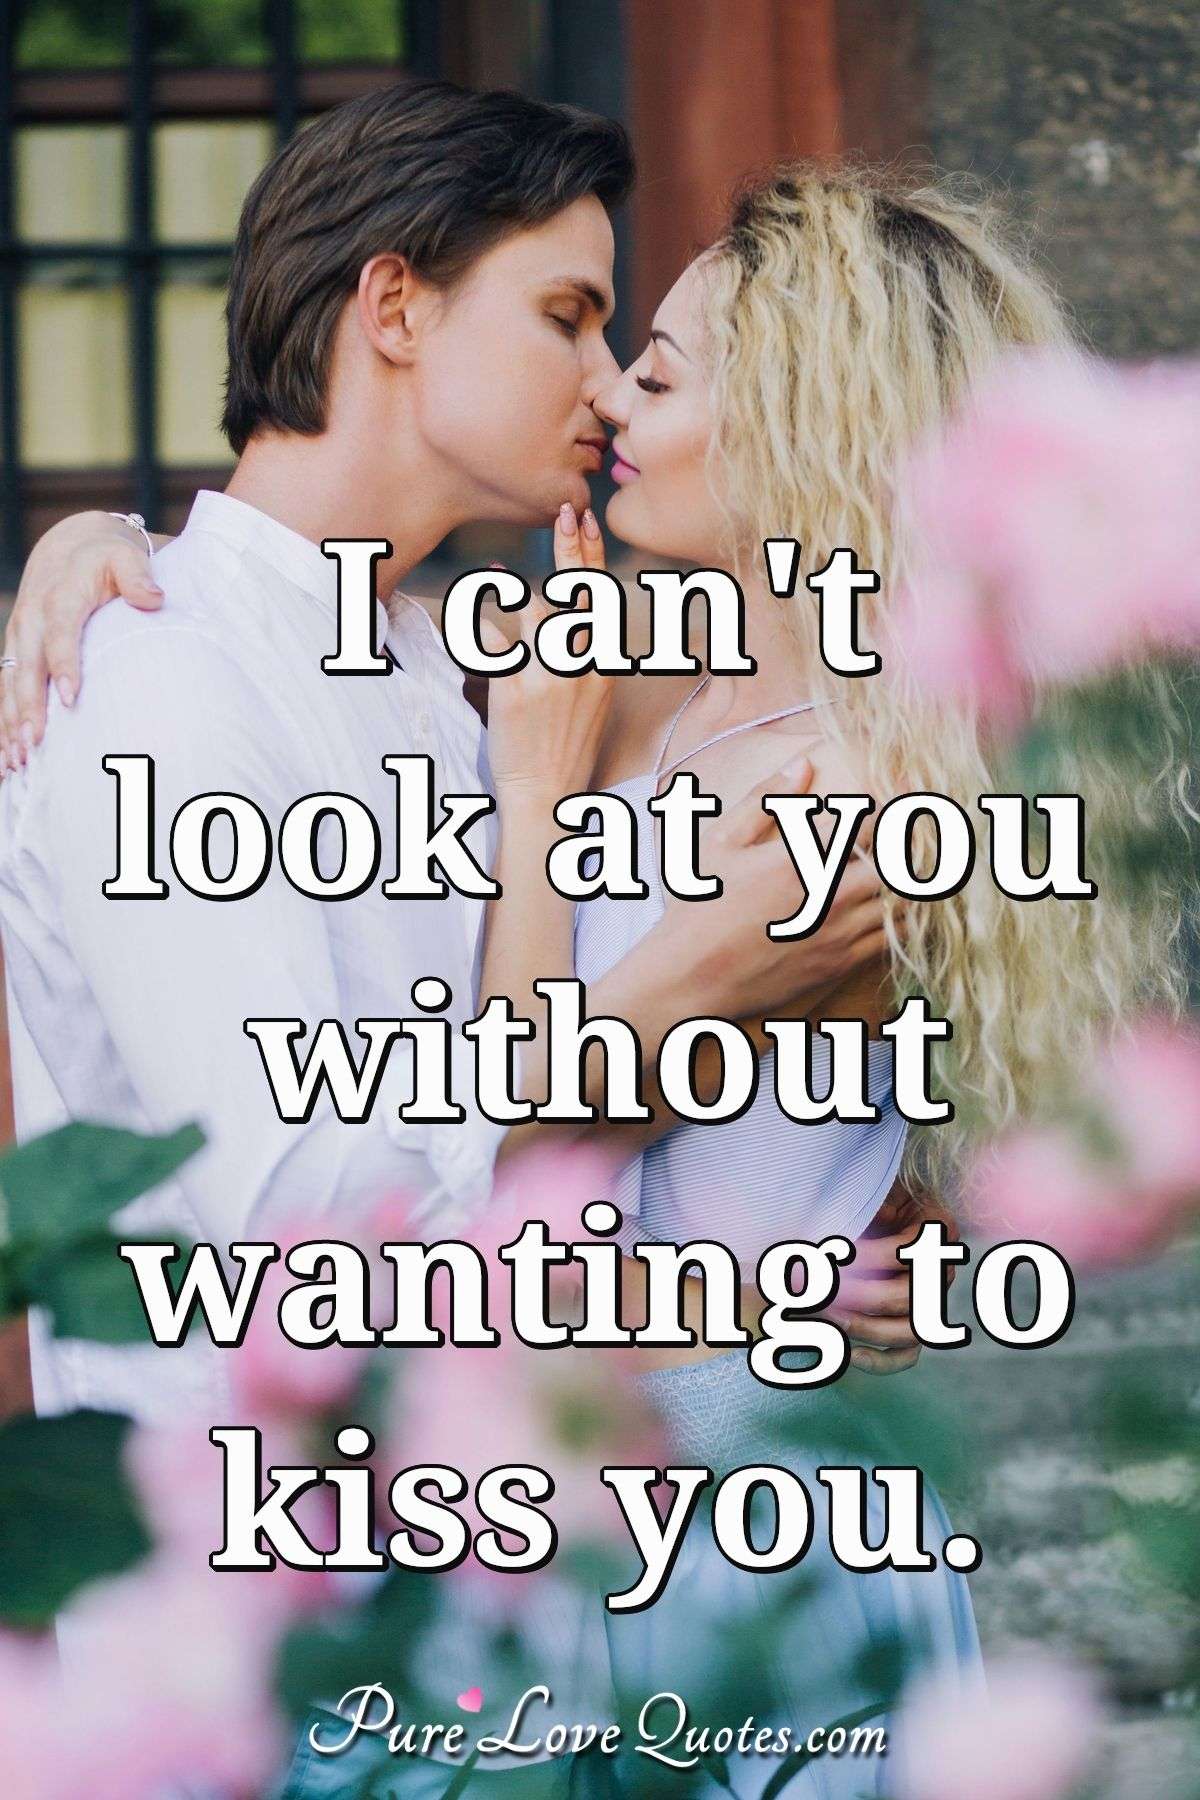 I can't look at you without wanting to kiss you. - Anonymous